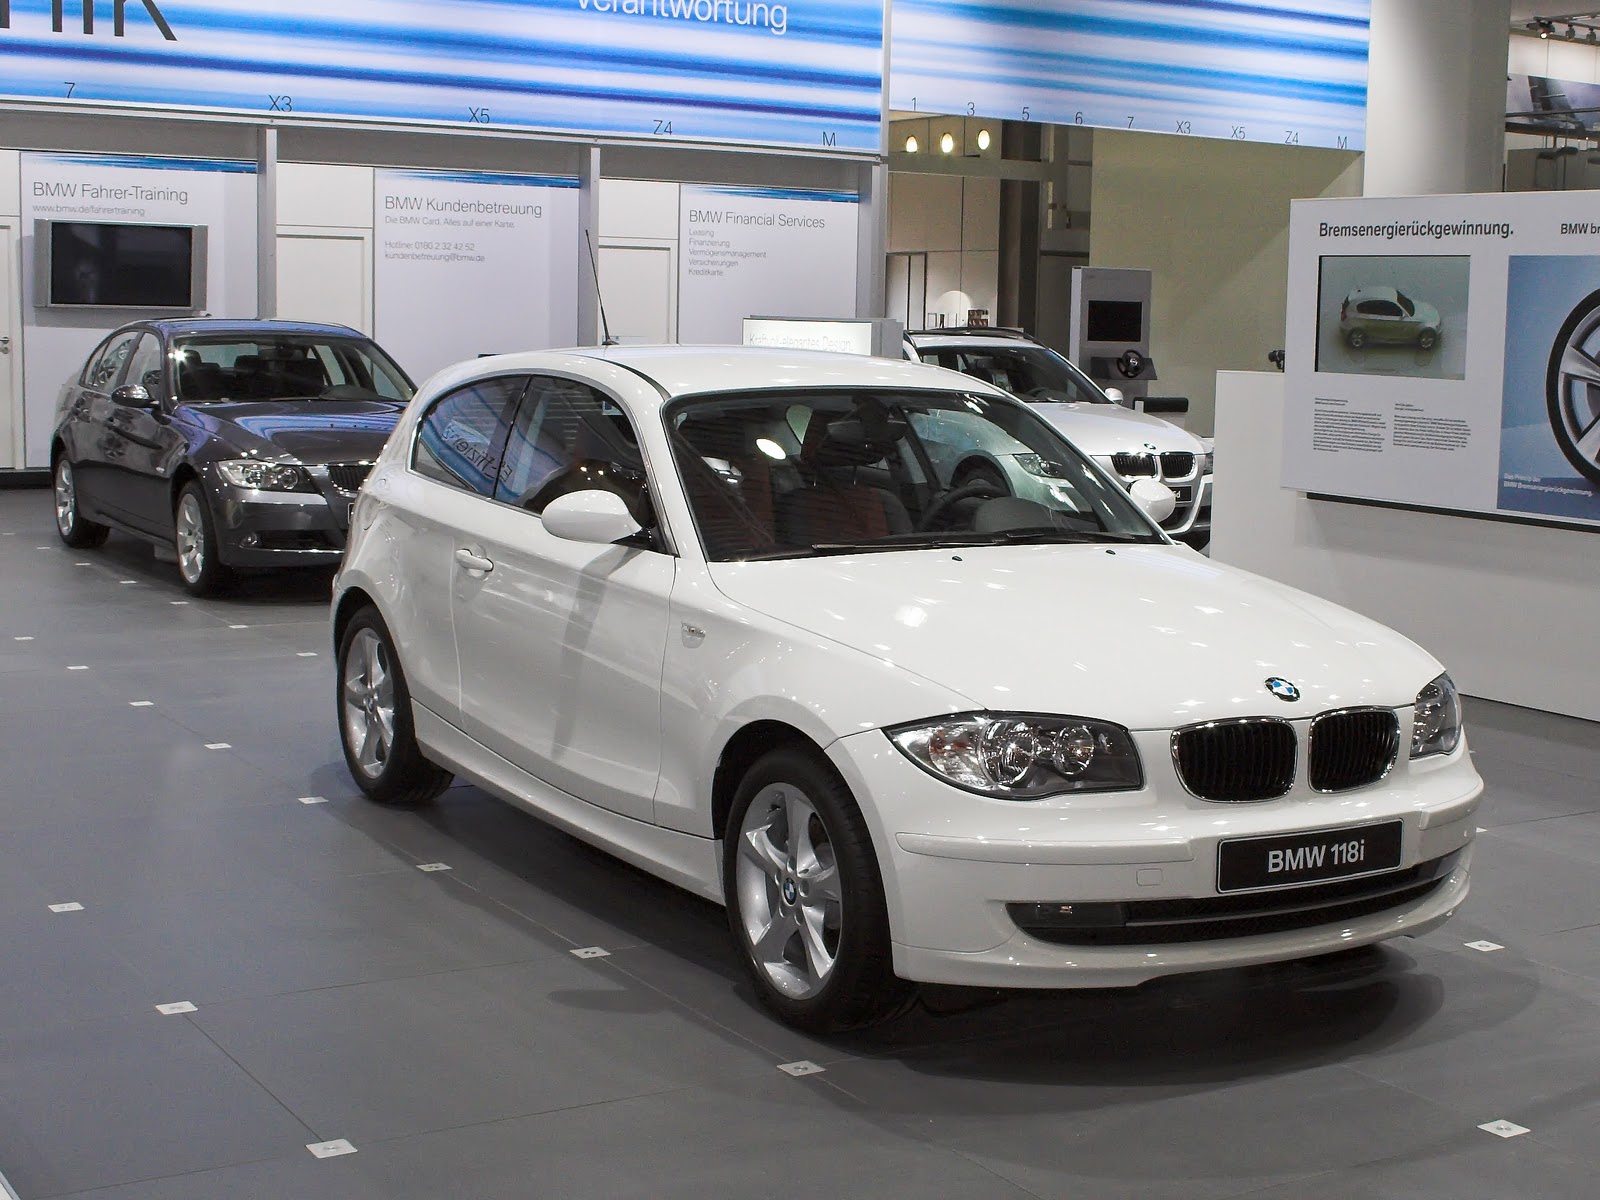 ... Prices In SHowroom with BMW footman james classic car insurance quotes